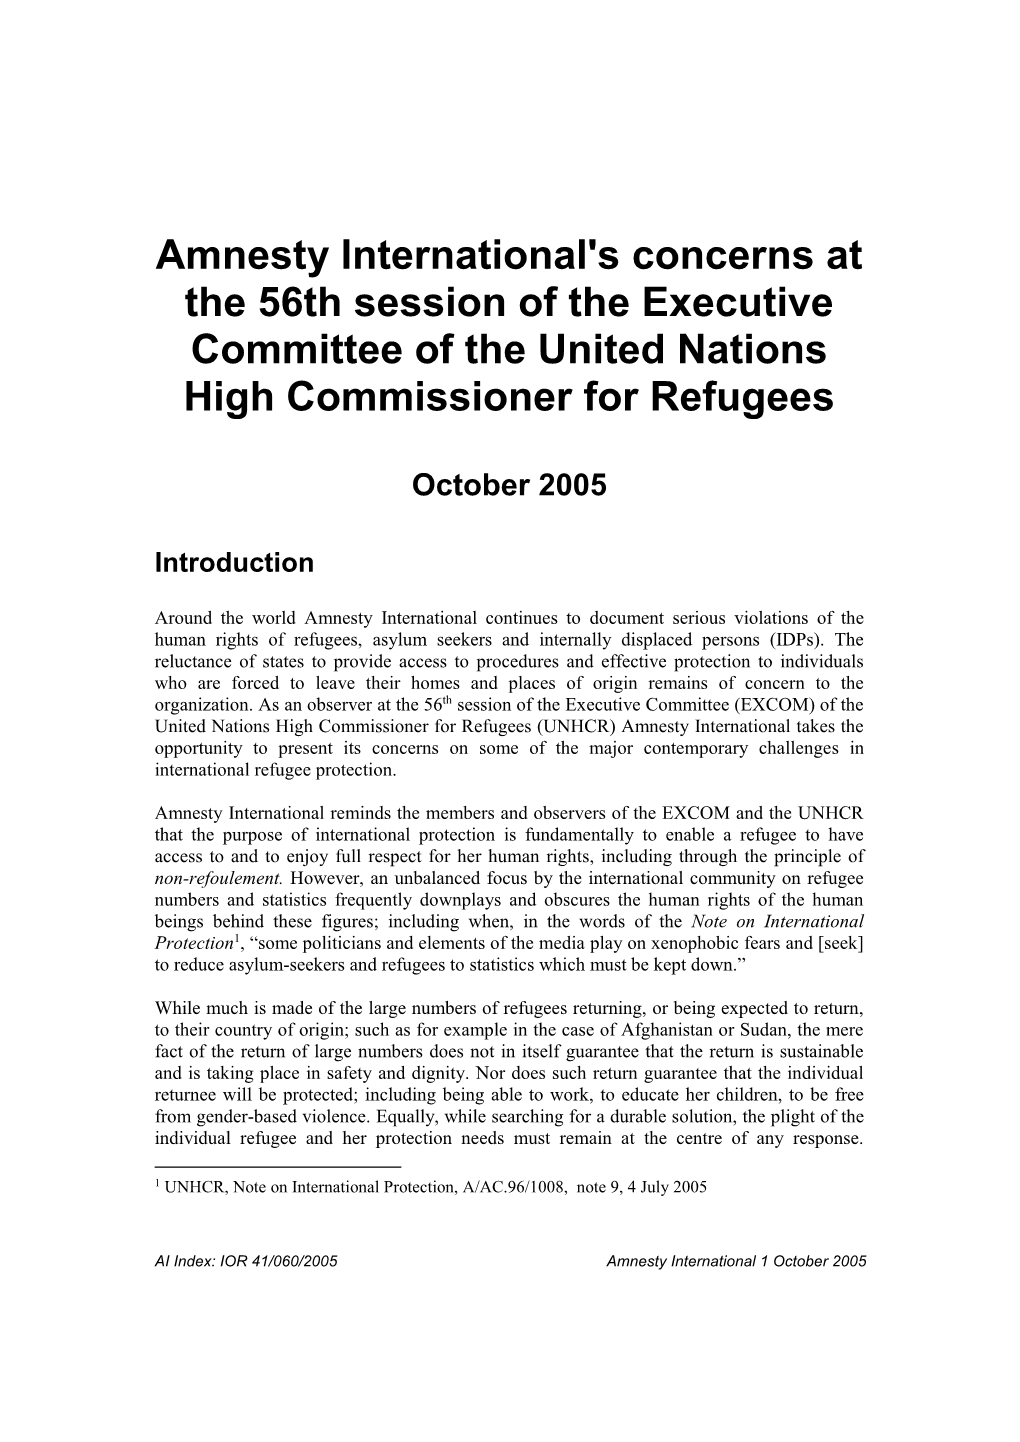 Amnesty International's Concerns at the 56Th Session of the Executive Committee of the United Nations High Commissioner for Refugees